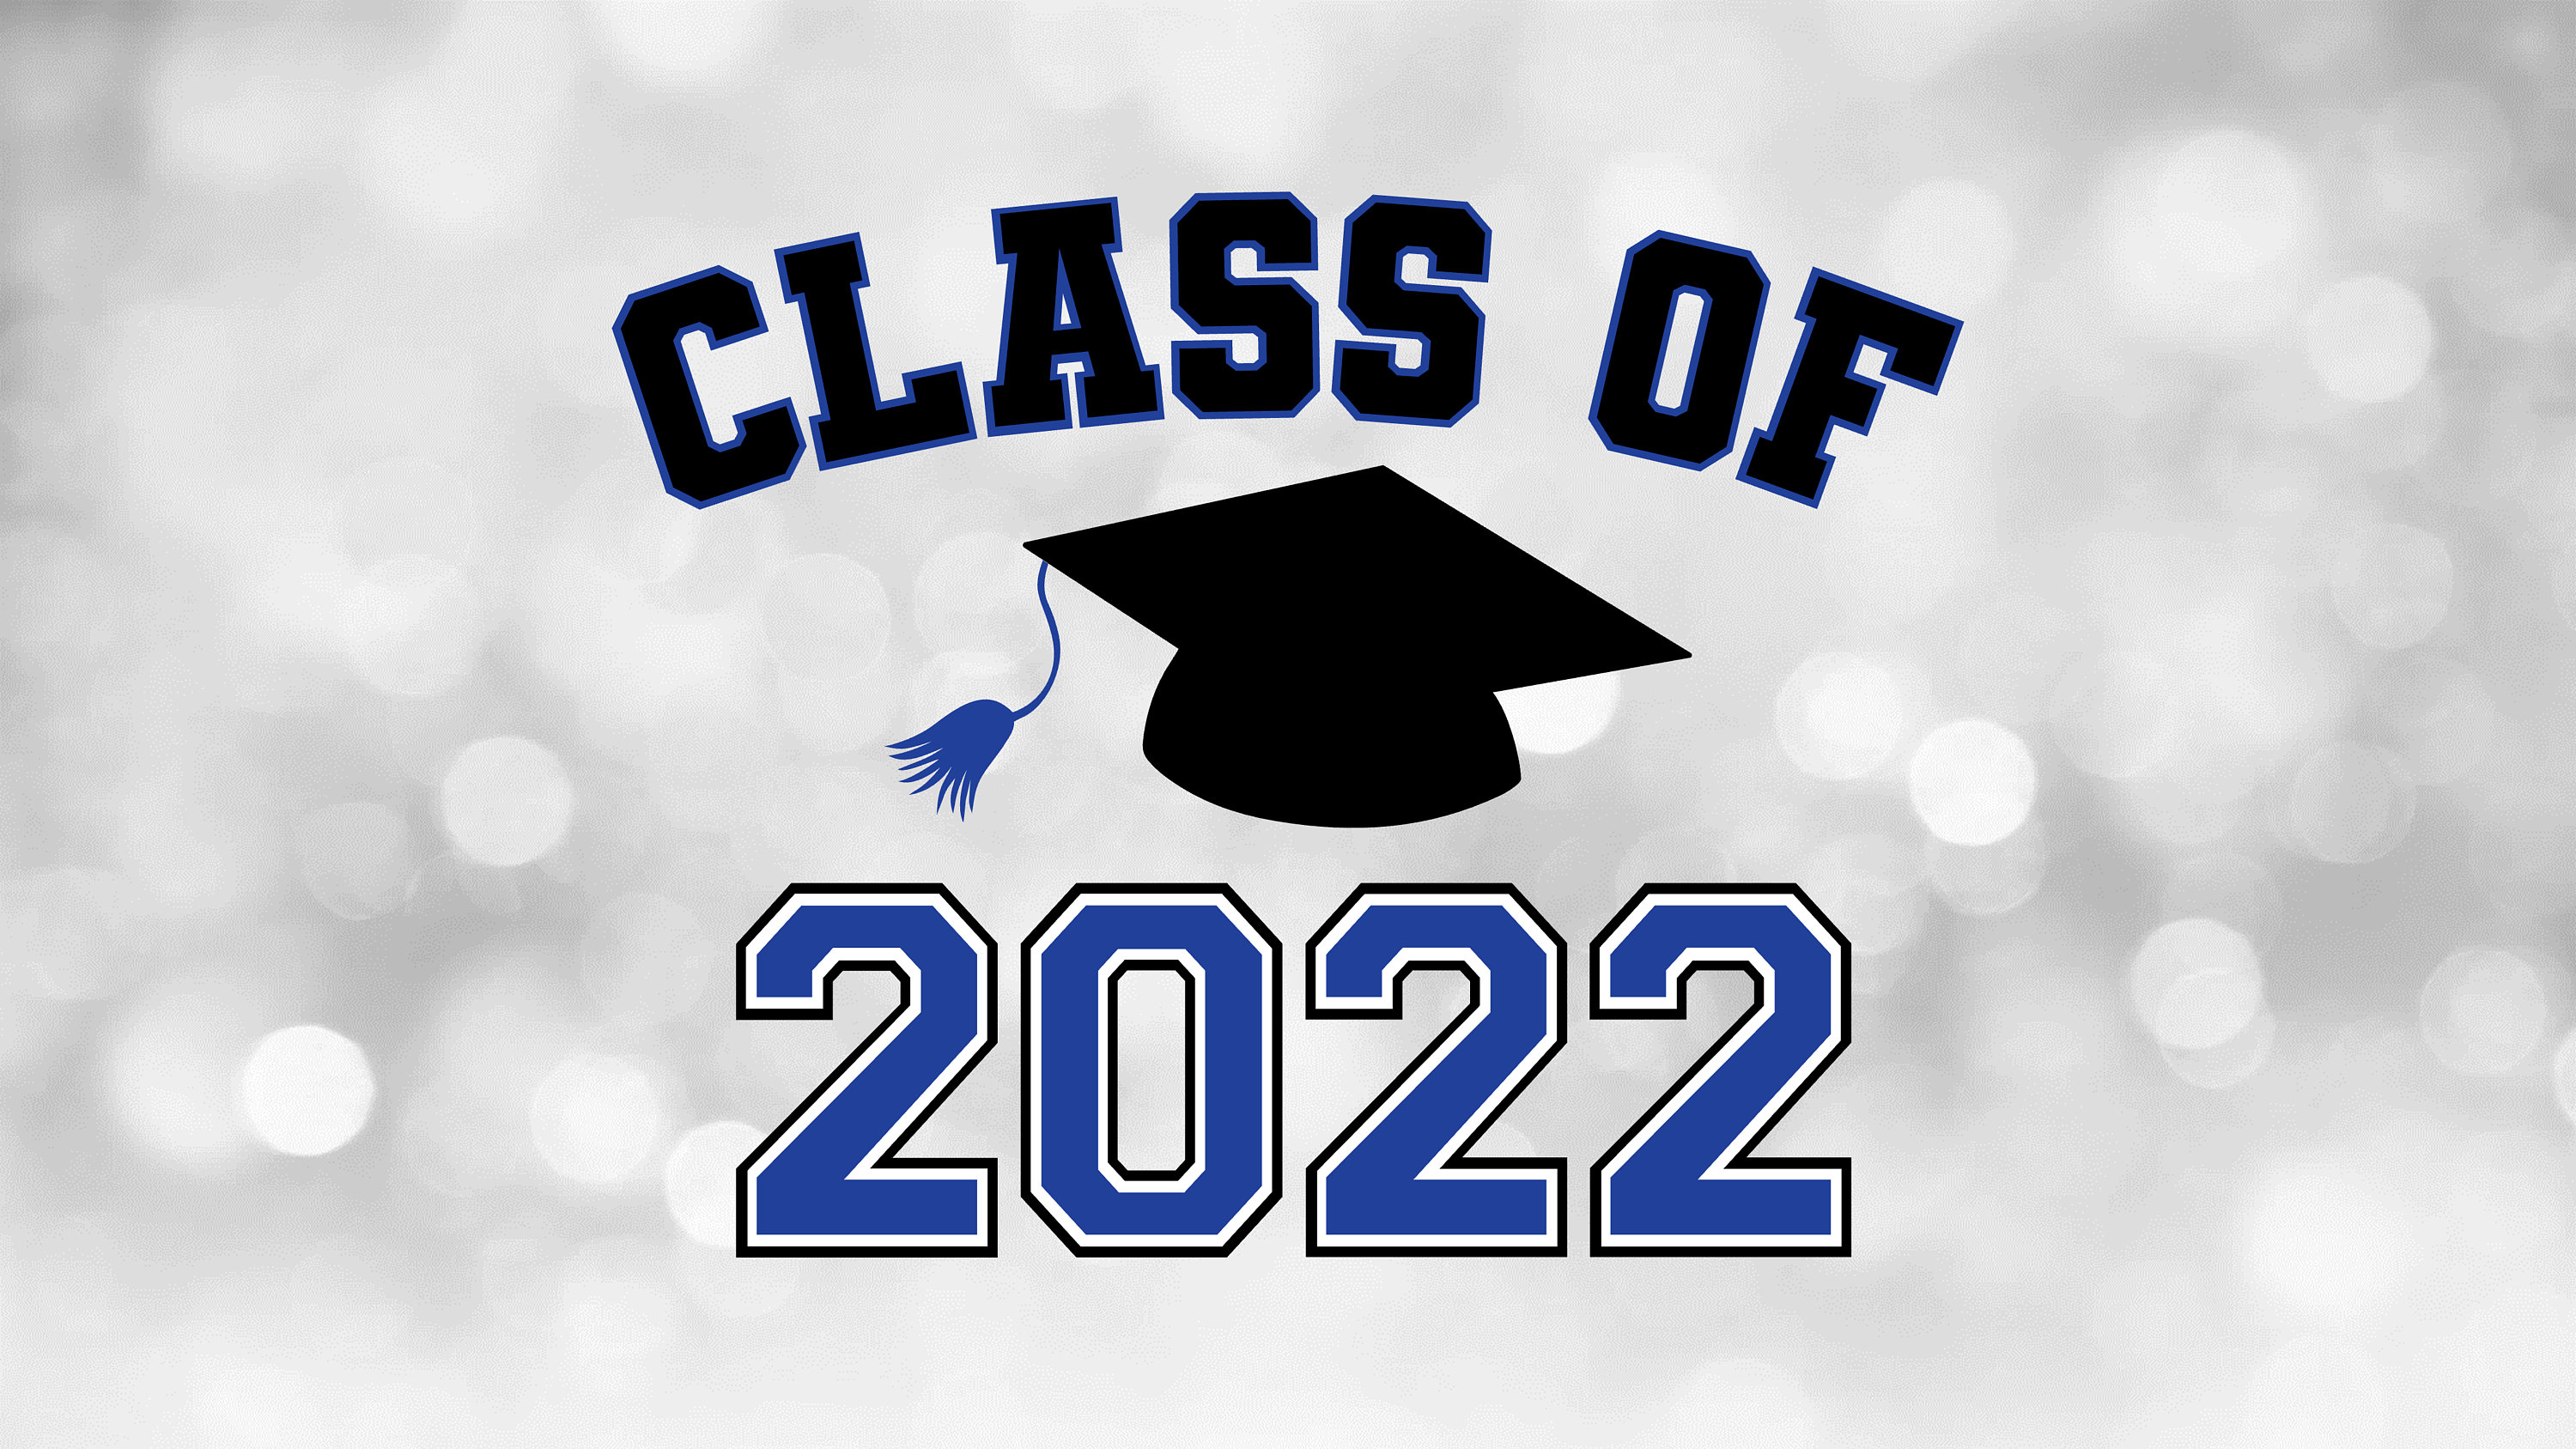 Educational Clip-art: Class of 2022 Arched /college Letters | Etsy